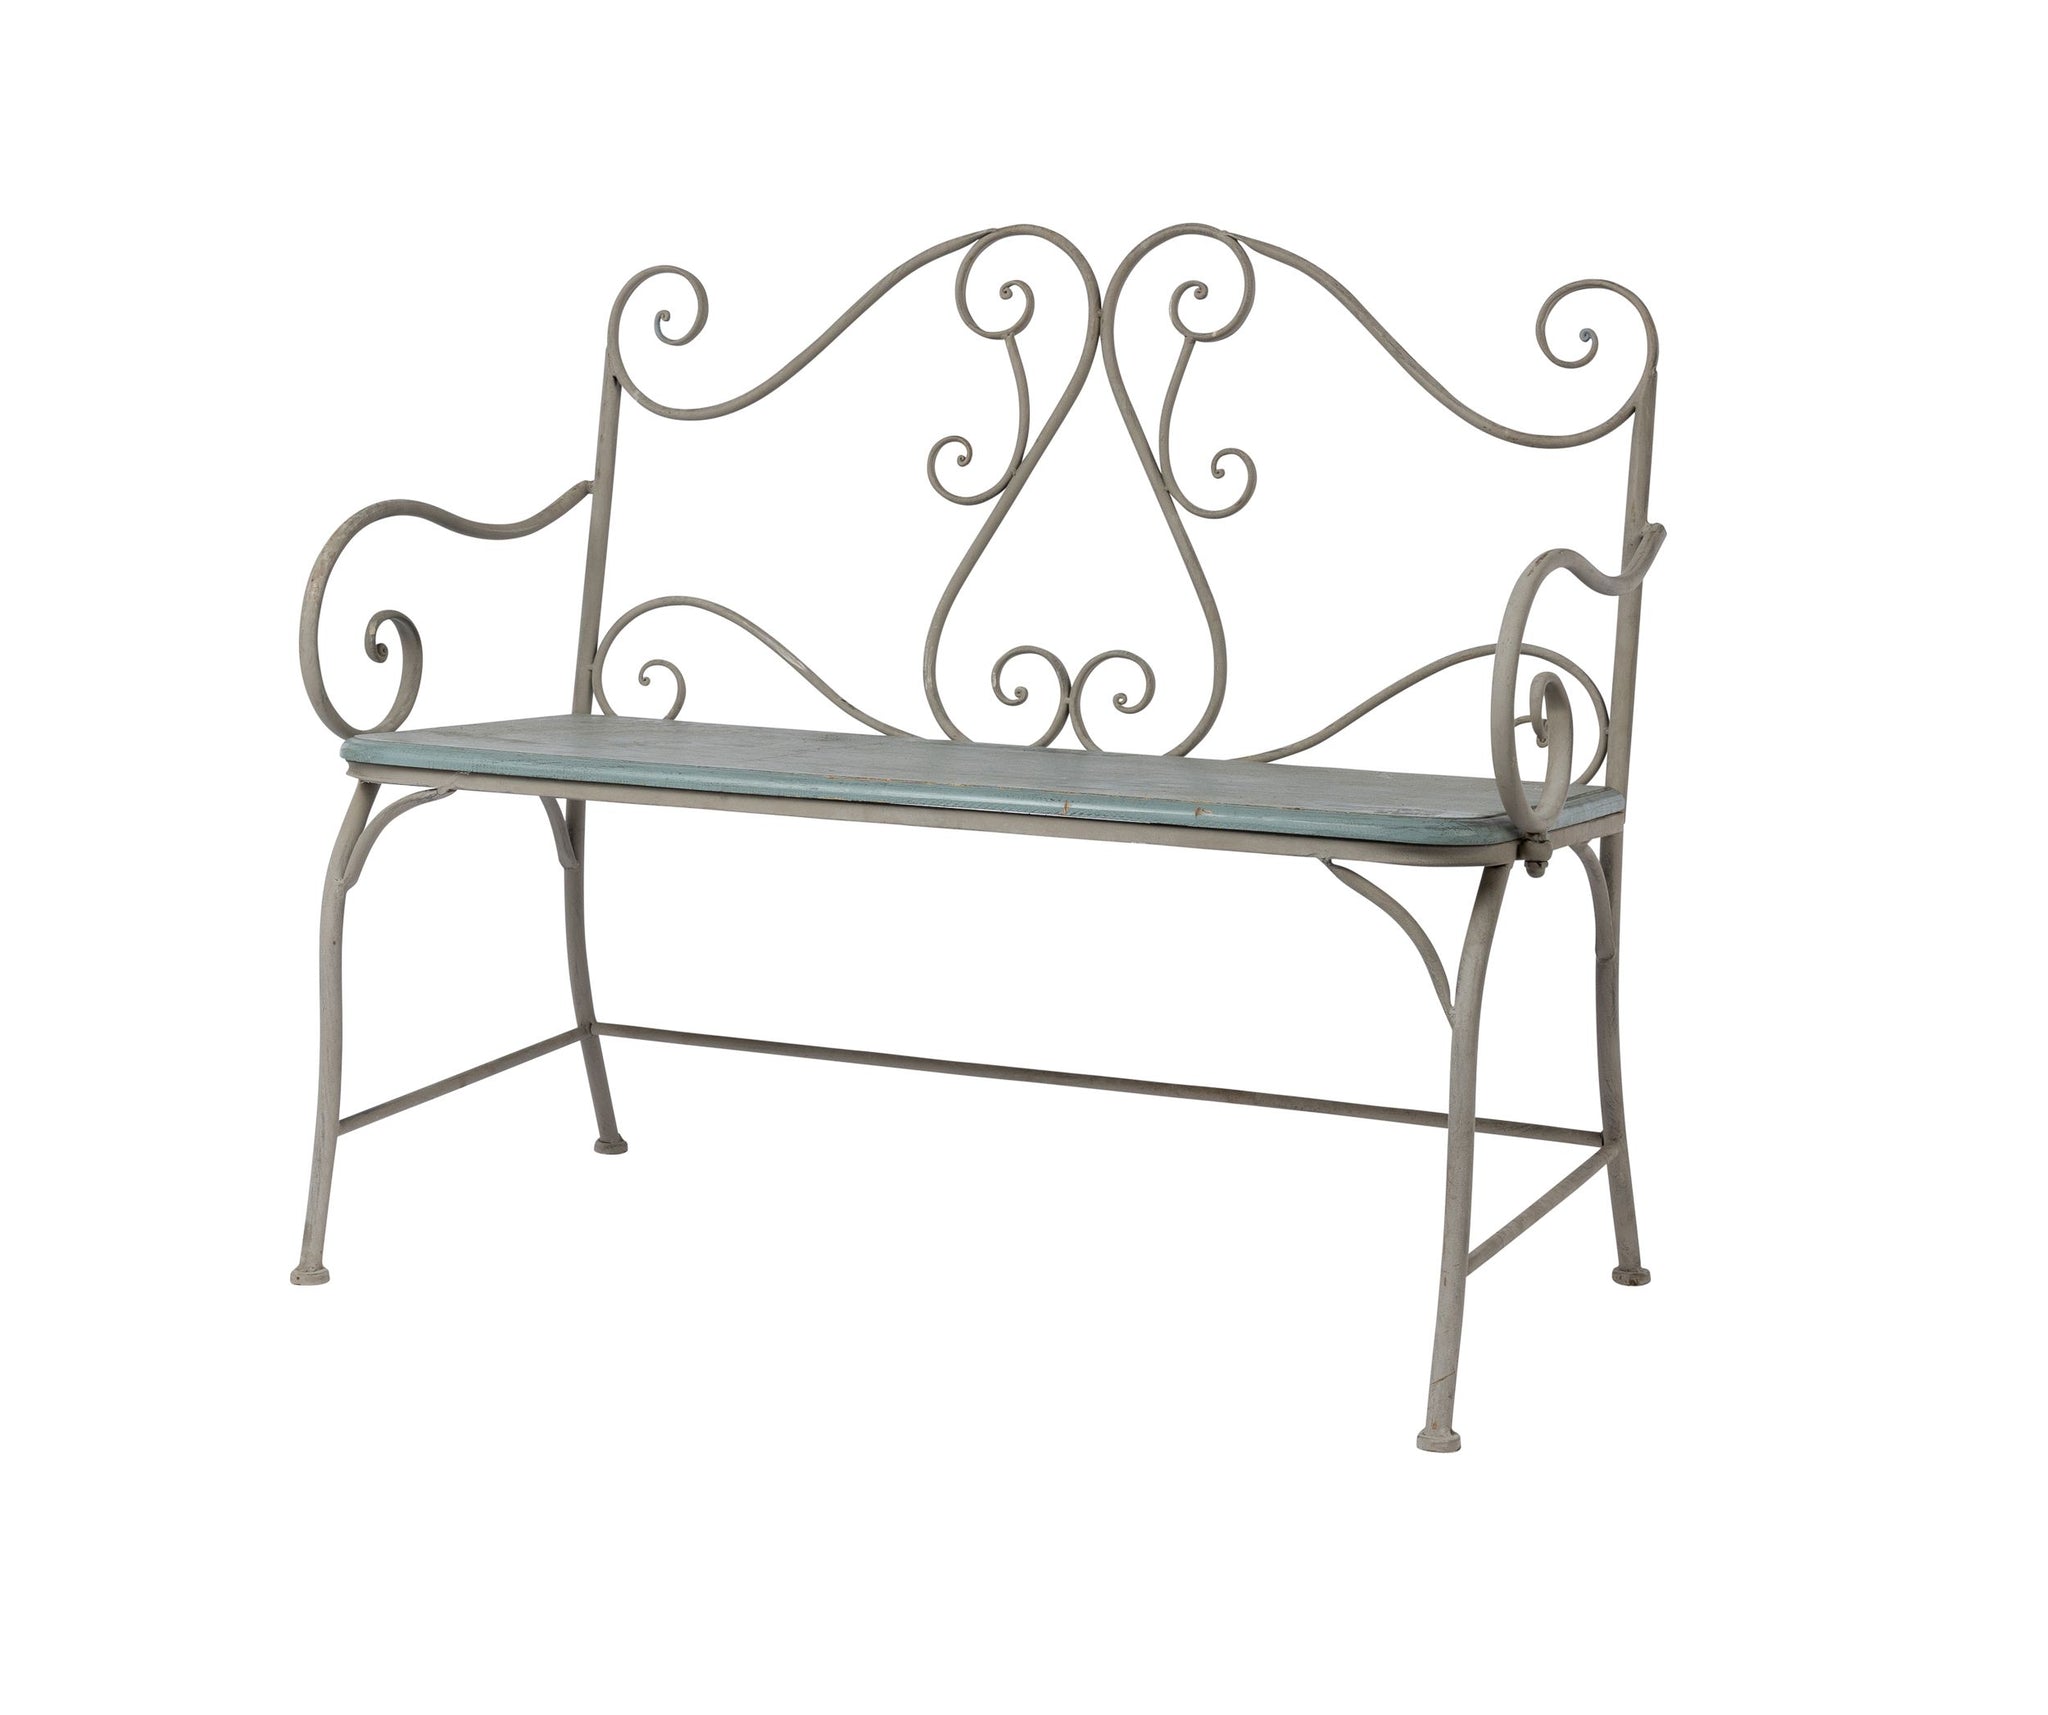 Vintage French outdoor bench seat from Provence